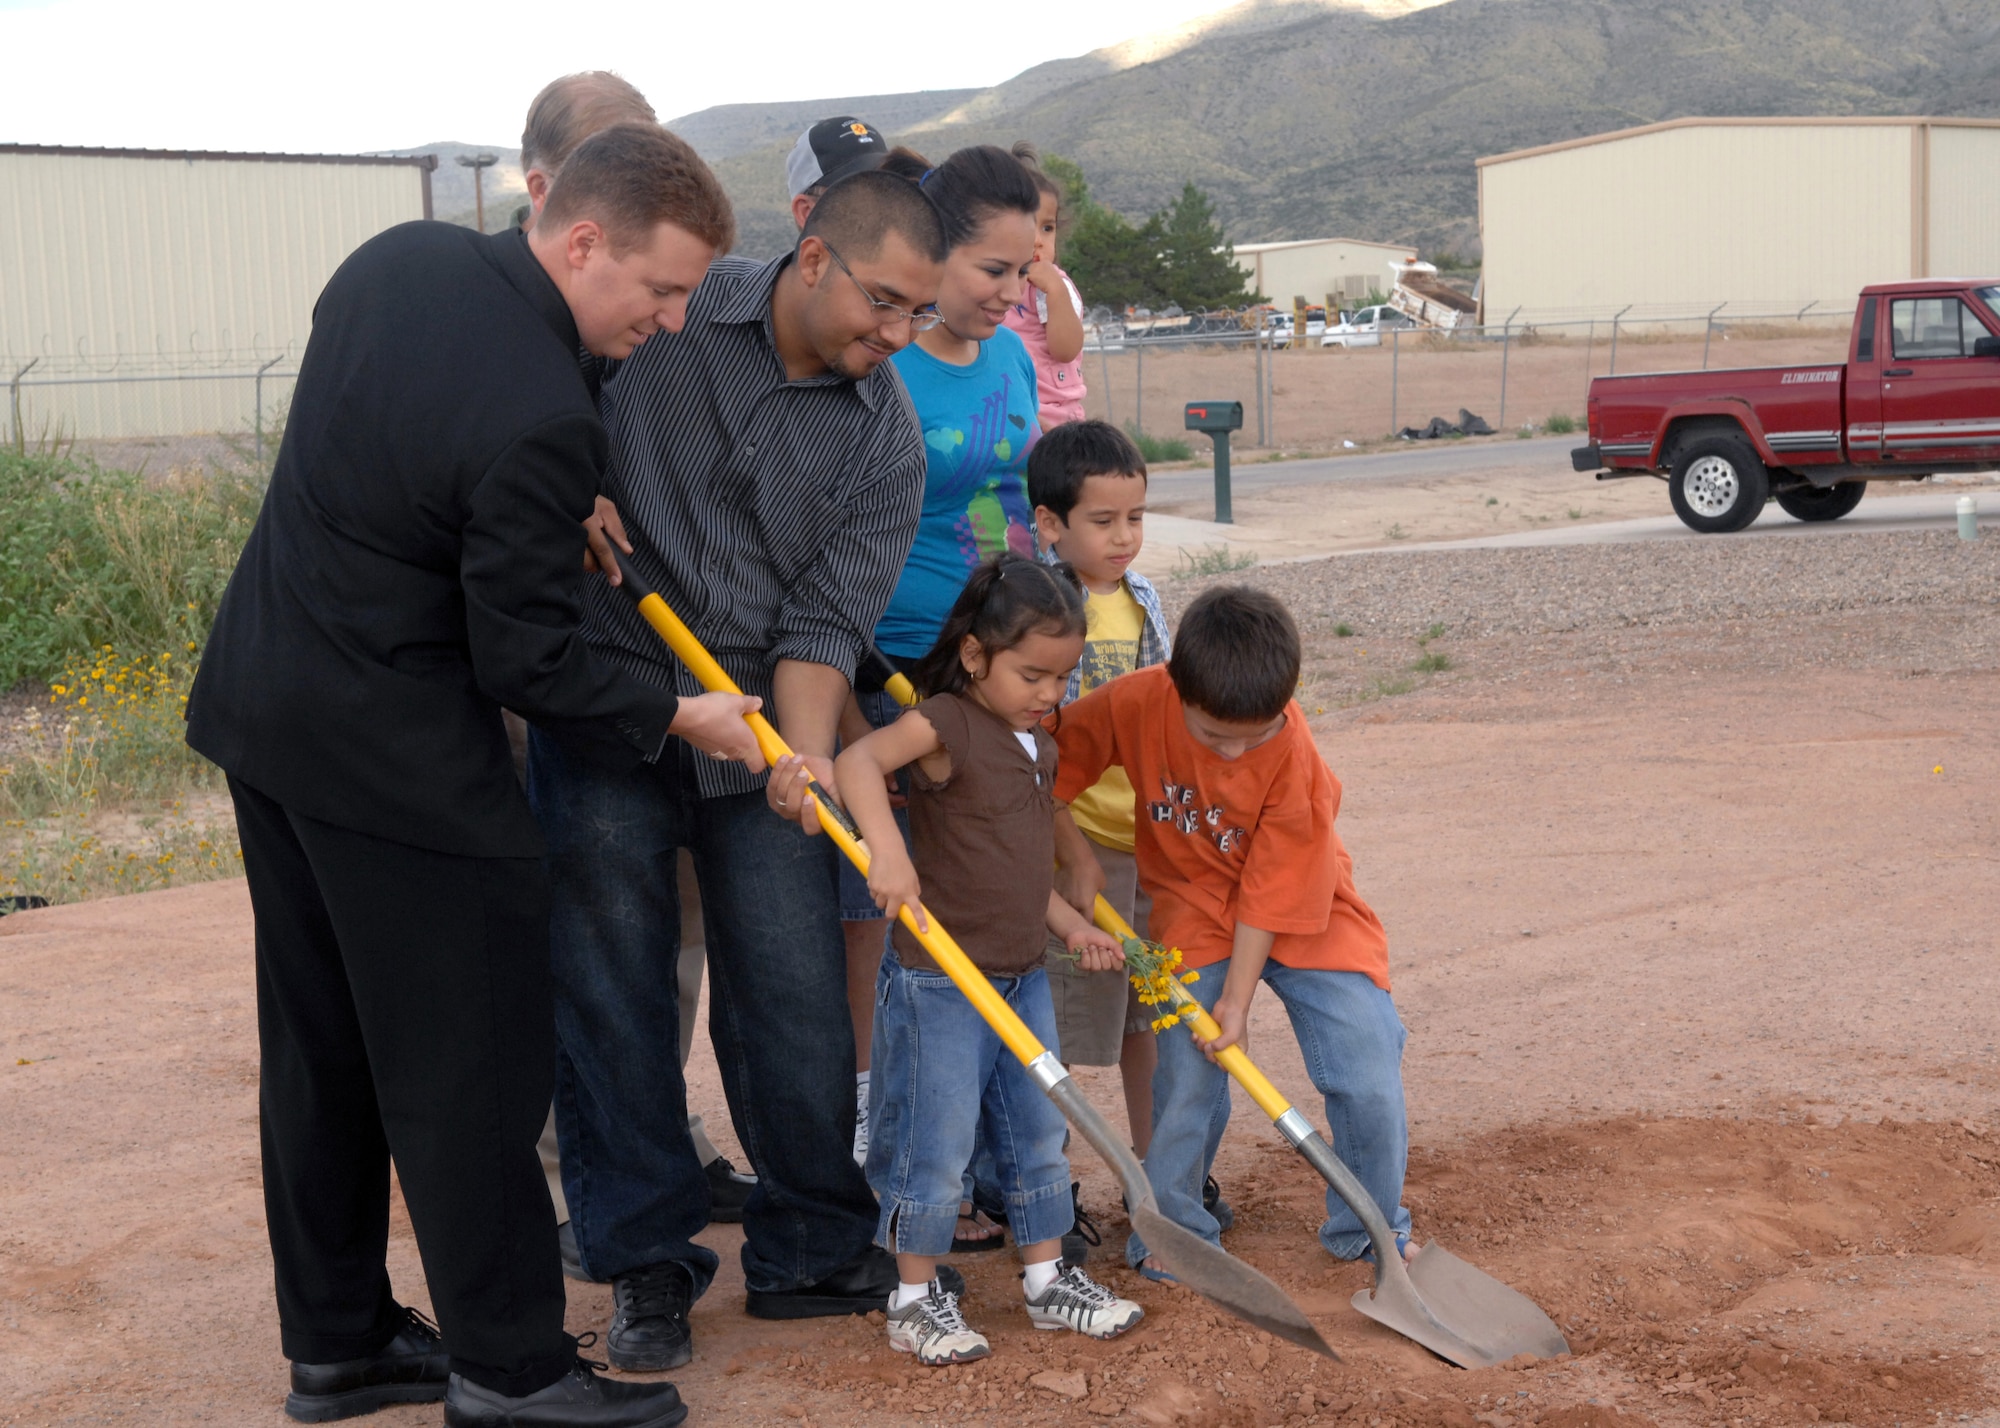 Chaplain Matt Glaros, 49th Fighter Wing Chapel, helps the Duran family during the groundbreaking ceremony, October 12,  at the building site of a new Habitat for Humanity home in Alamogordo, N.M. Chaplain Glaros attended the ceremony on  26th street to give an invocation for the soon-to-be homeowners . (U.S. Air Force photo/Airman 1st Class Veronica Salgado)